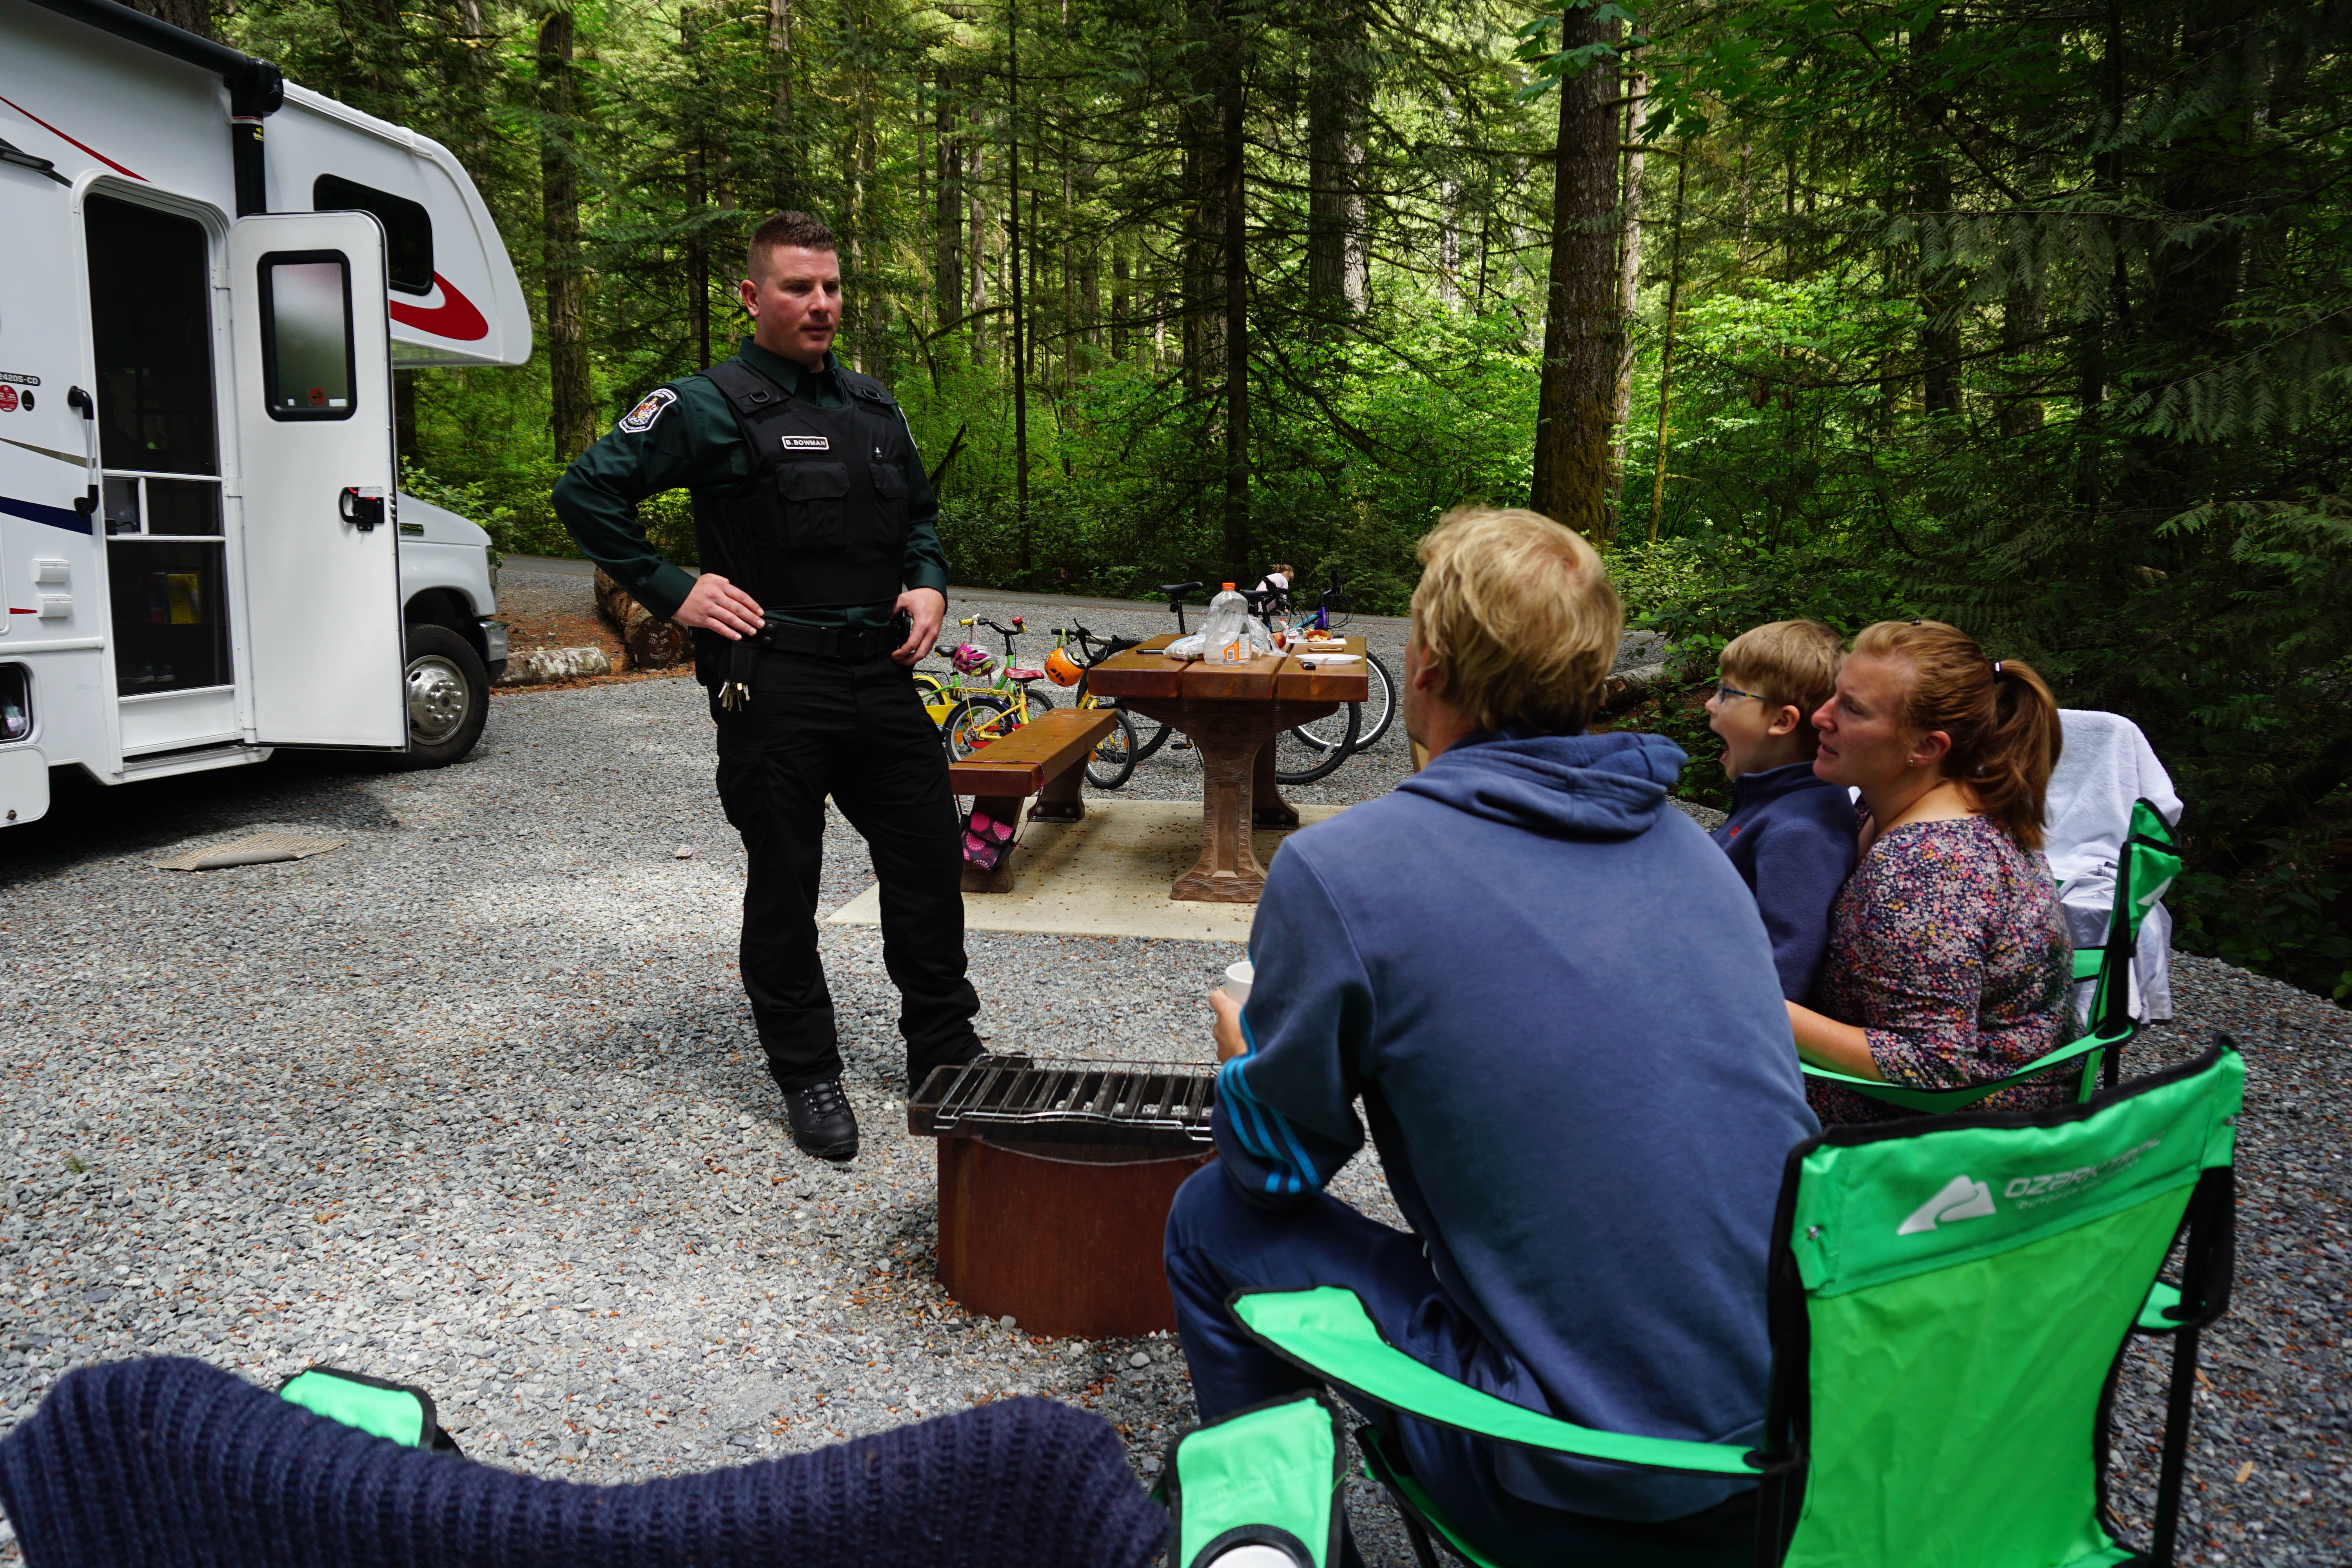 A NRO speaks with campers about their campfire